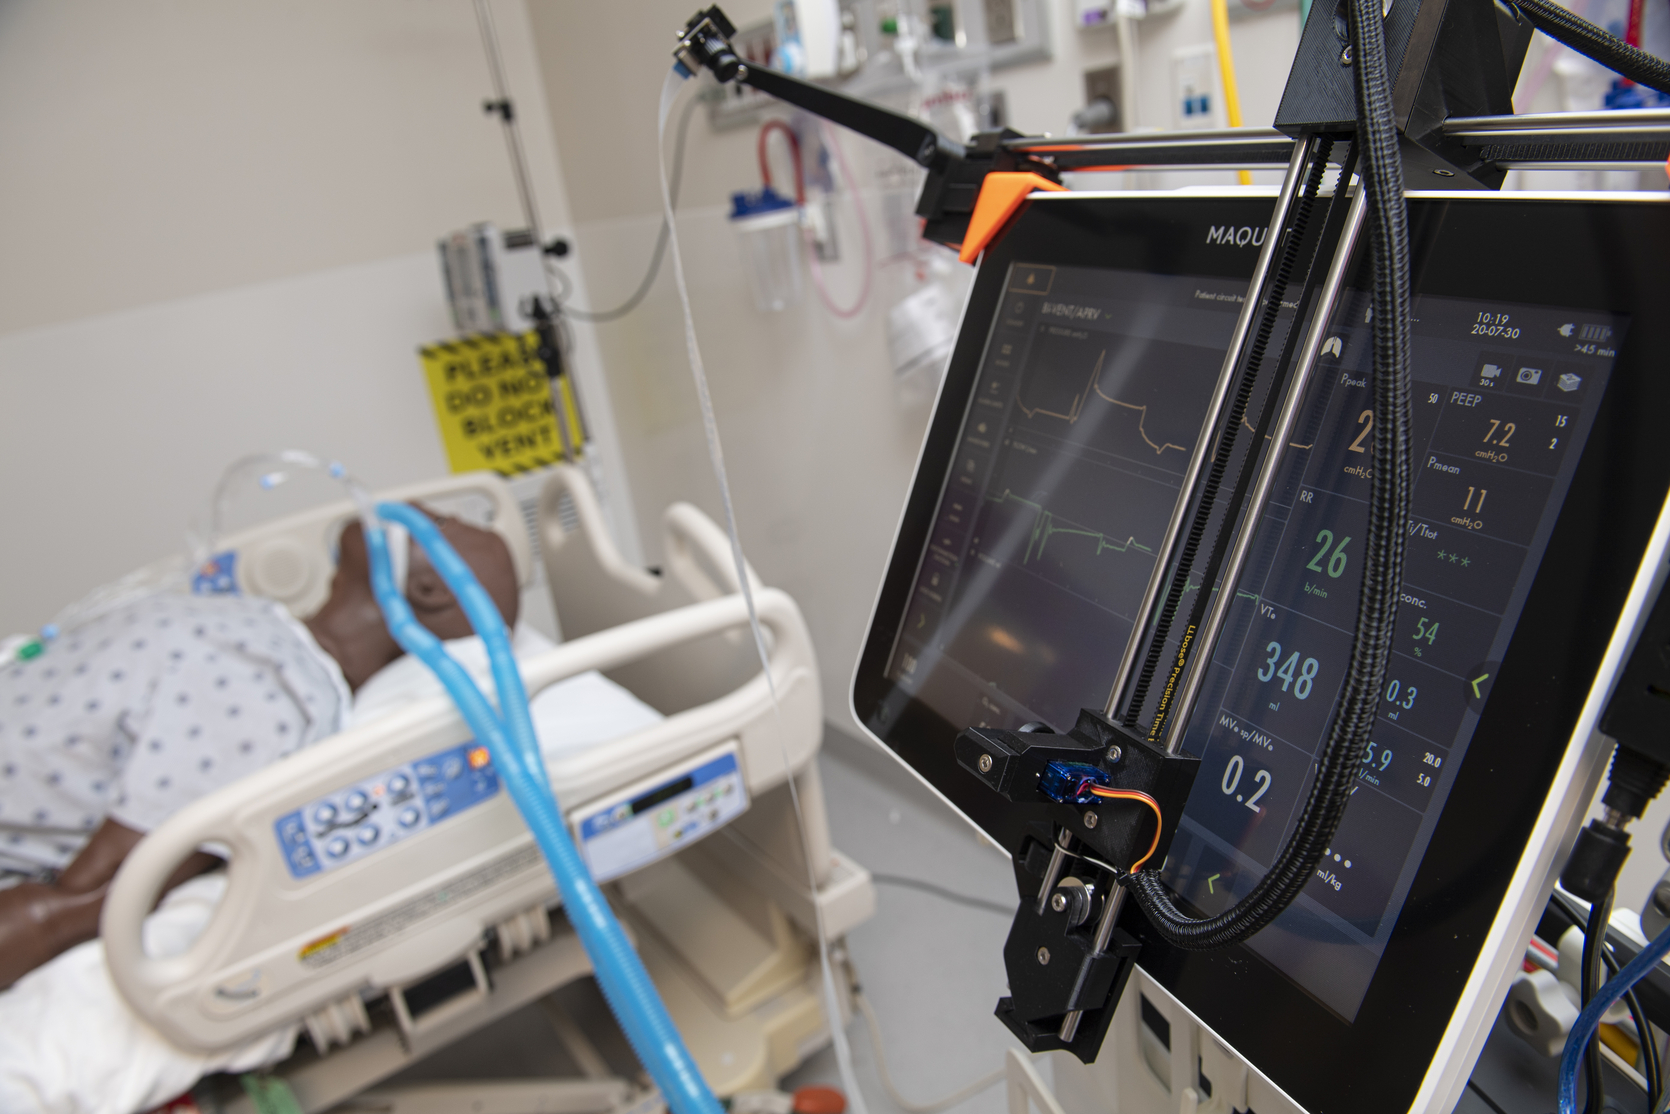 A monitor showing vital signs. It is connected to a mannequin in a hospital bed.